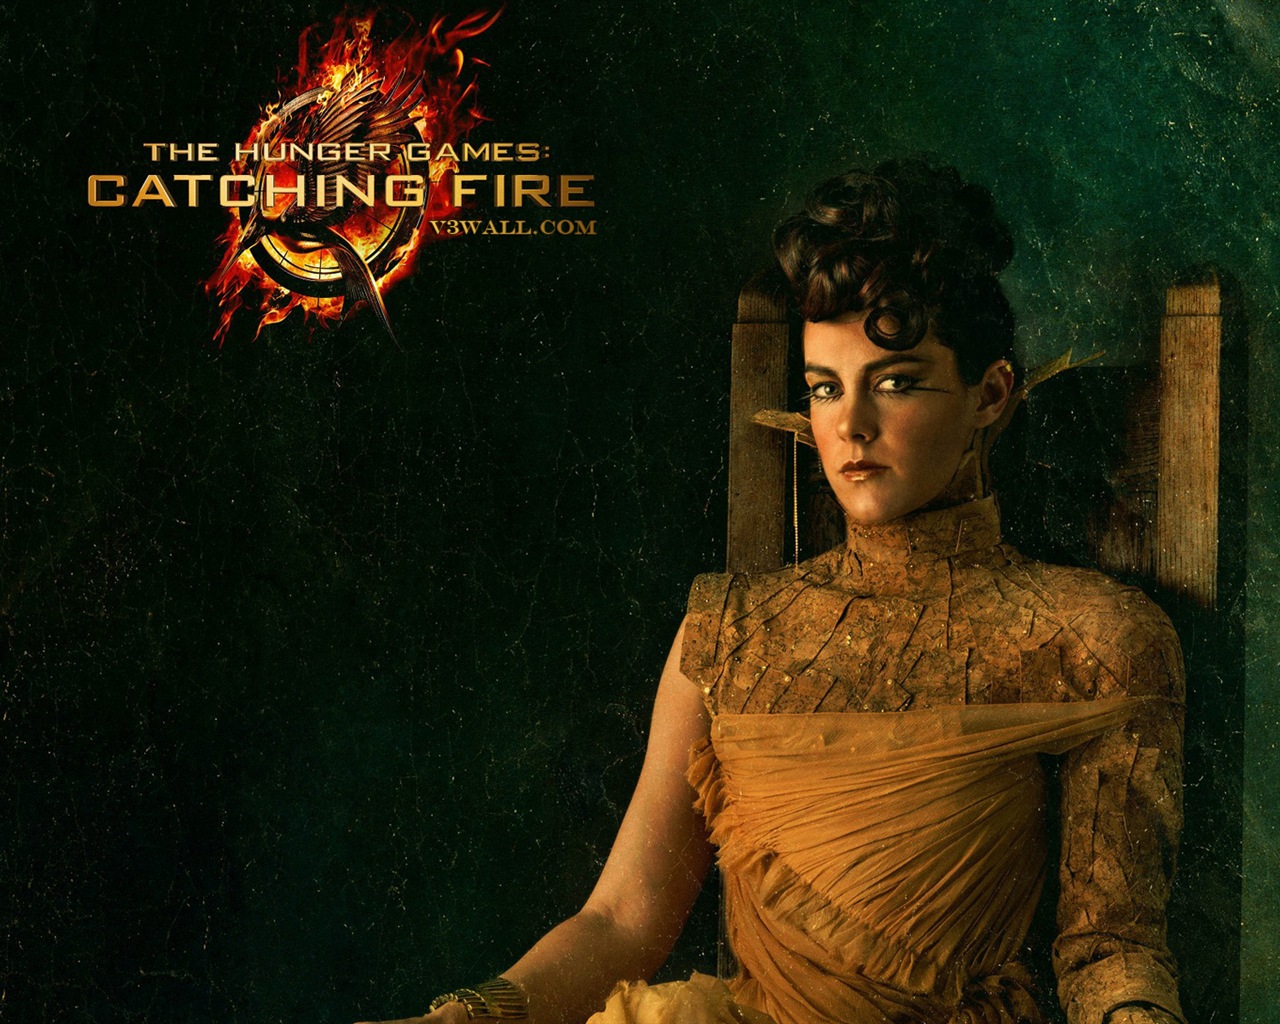 The Hunger Games: Catching Fire wallpapers HD #16 - 1280x1024